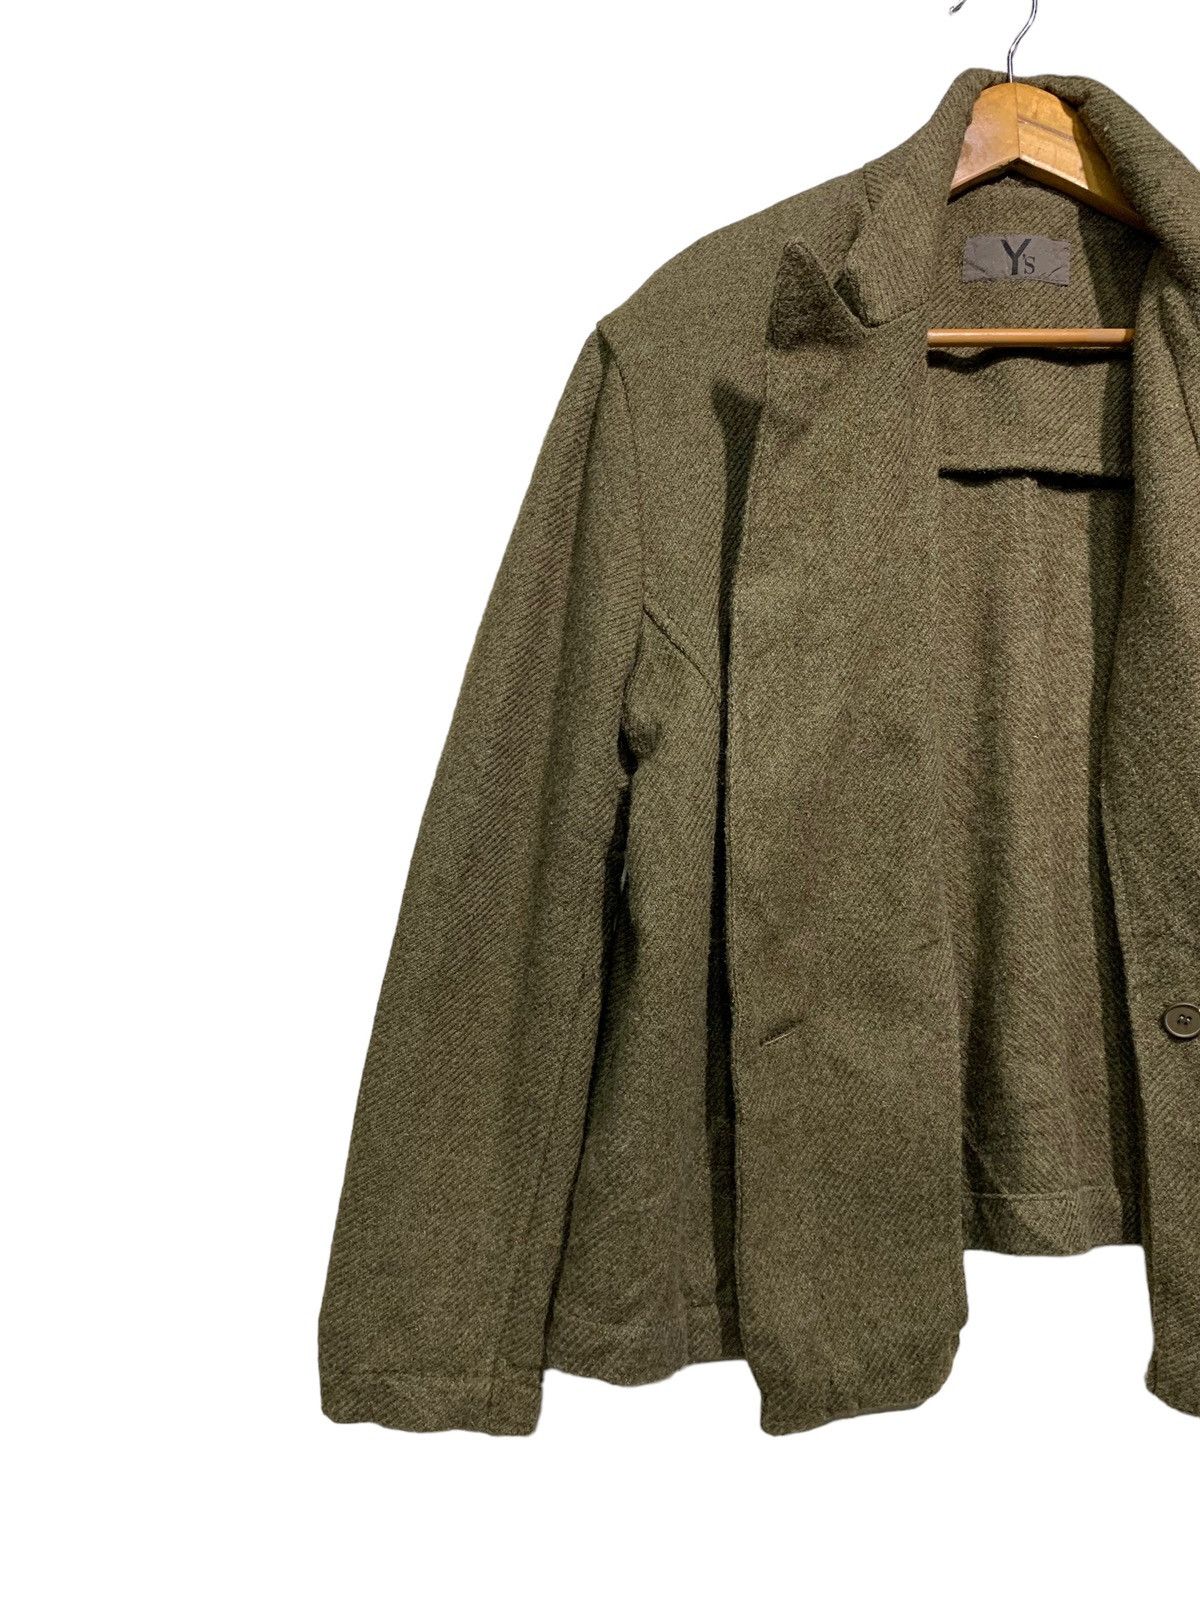 🔥Y’s WOOL DOUBLE BREAT JACKETS OLIVE GREEN - 2